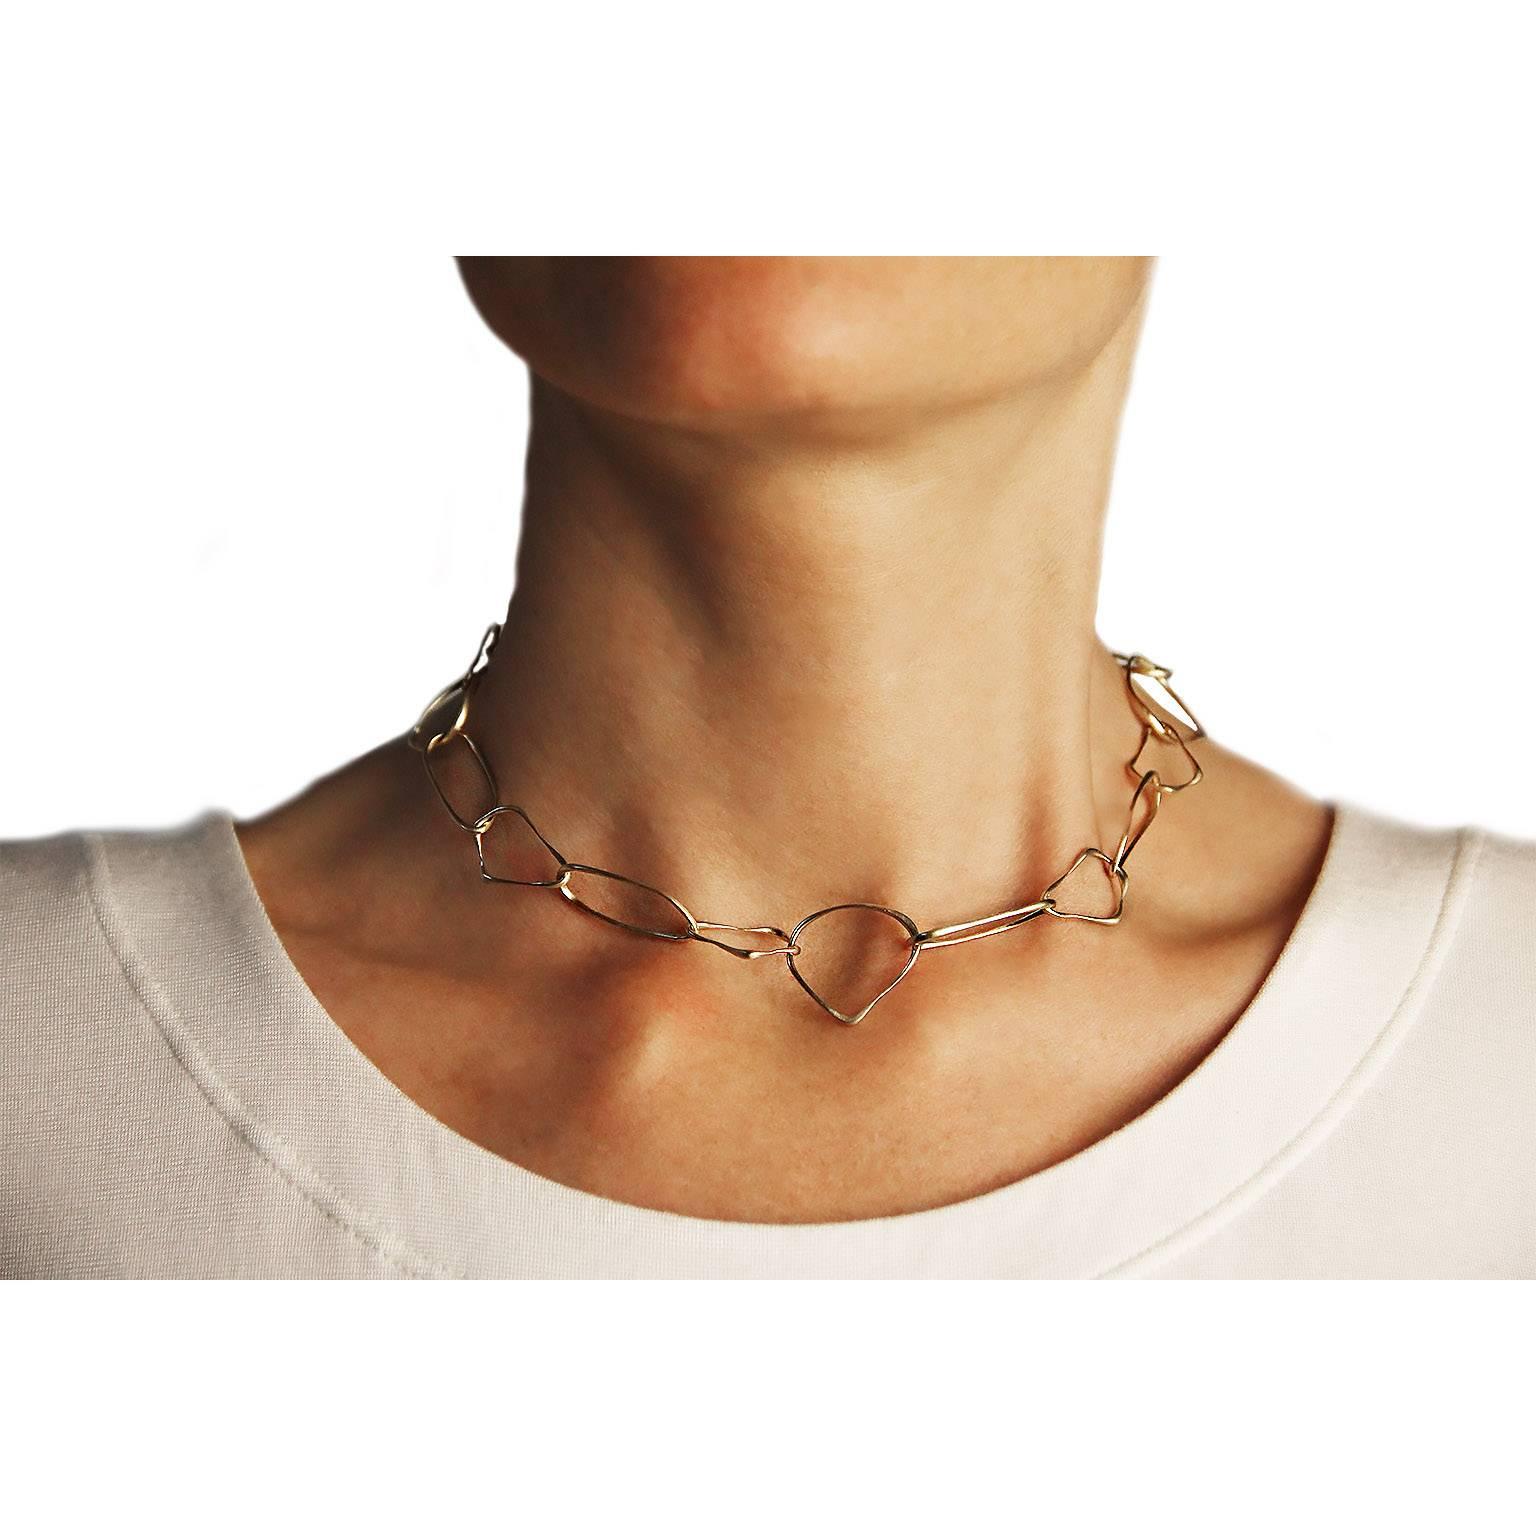 Jona design collection, hand crafted in Italy, 45 cm long free form 18 karat rose gold link necklace. 
All Jona jewelry is new and has never been previously owned or worn. Each item will arrive at your door beautifully gift wrapped in Jona boxes,